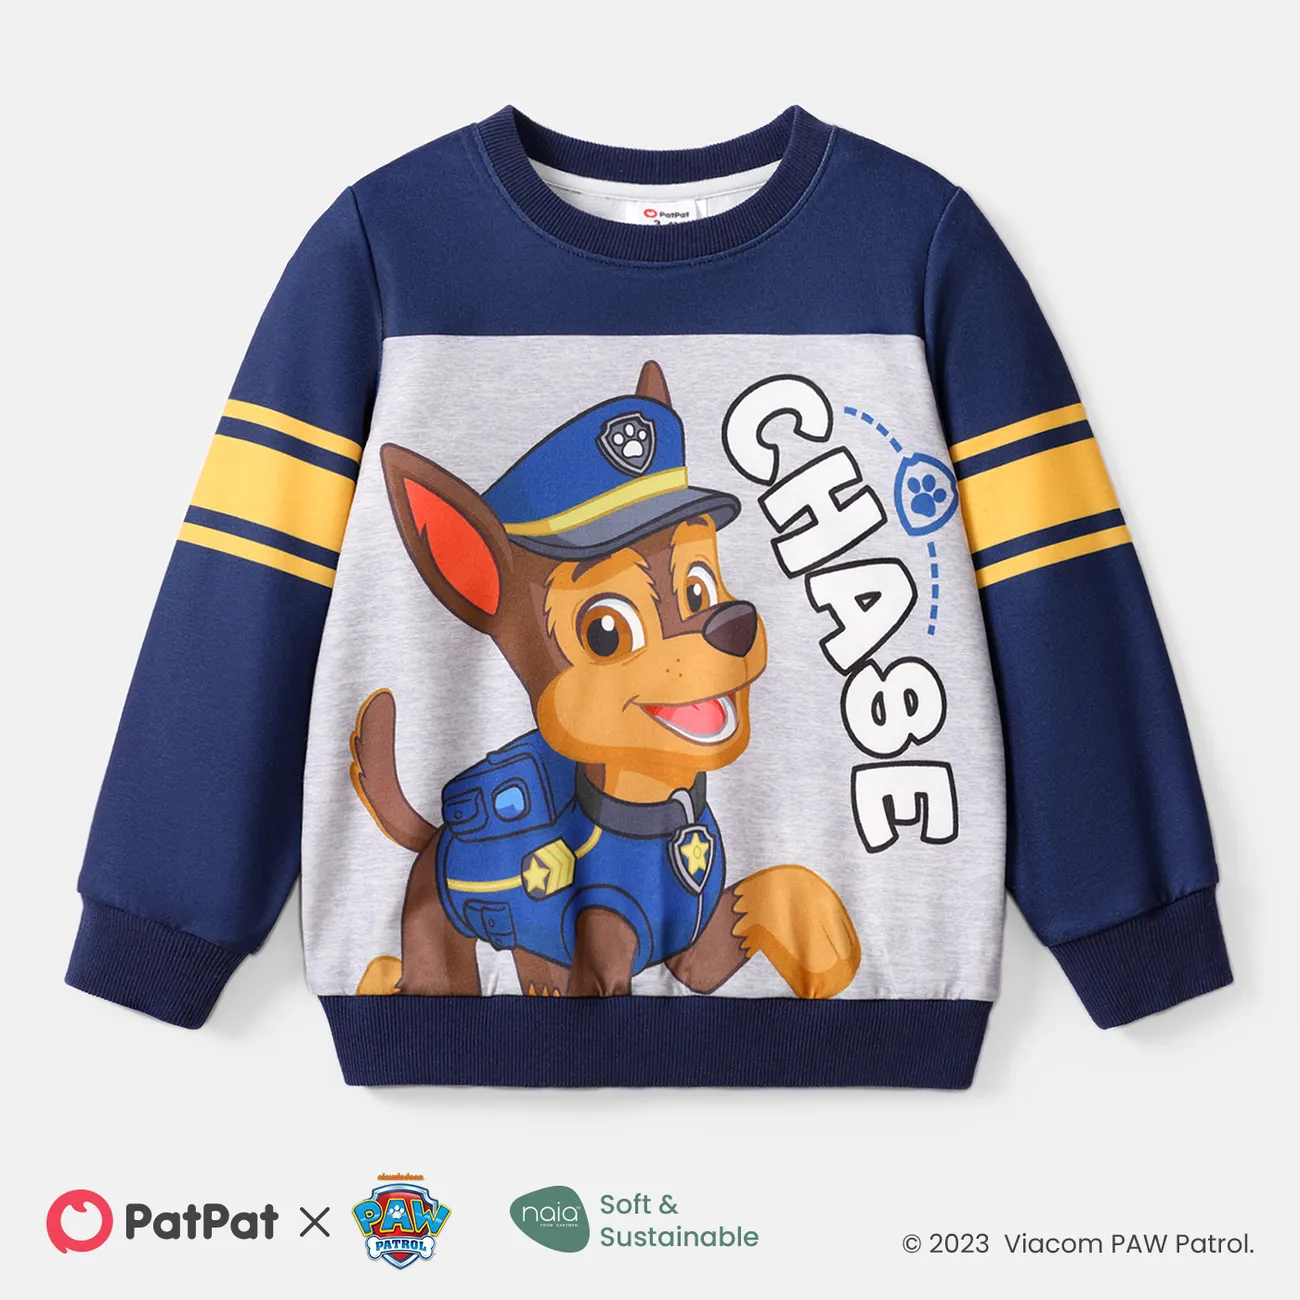 Mobile Print Patrol Naia™ PatPat $9.74 US Sweatshirt Toddler Only PAW Girl/Boy Pullover Character